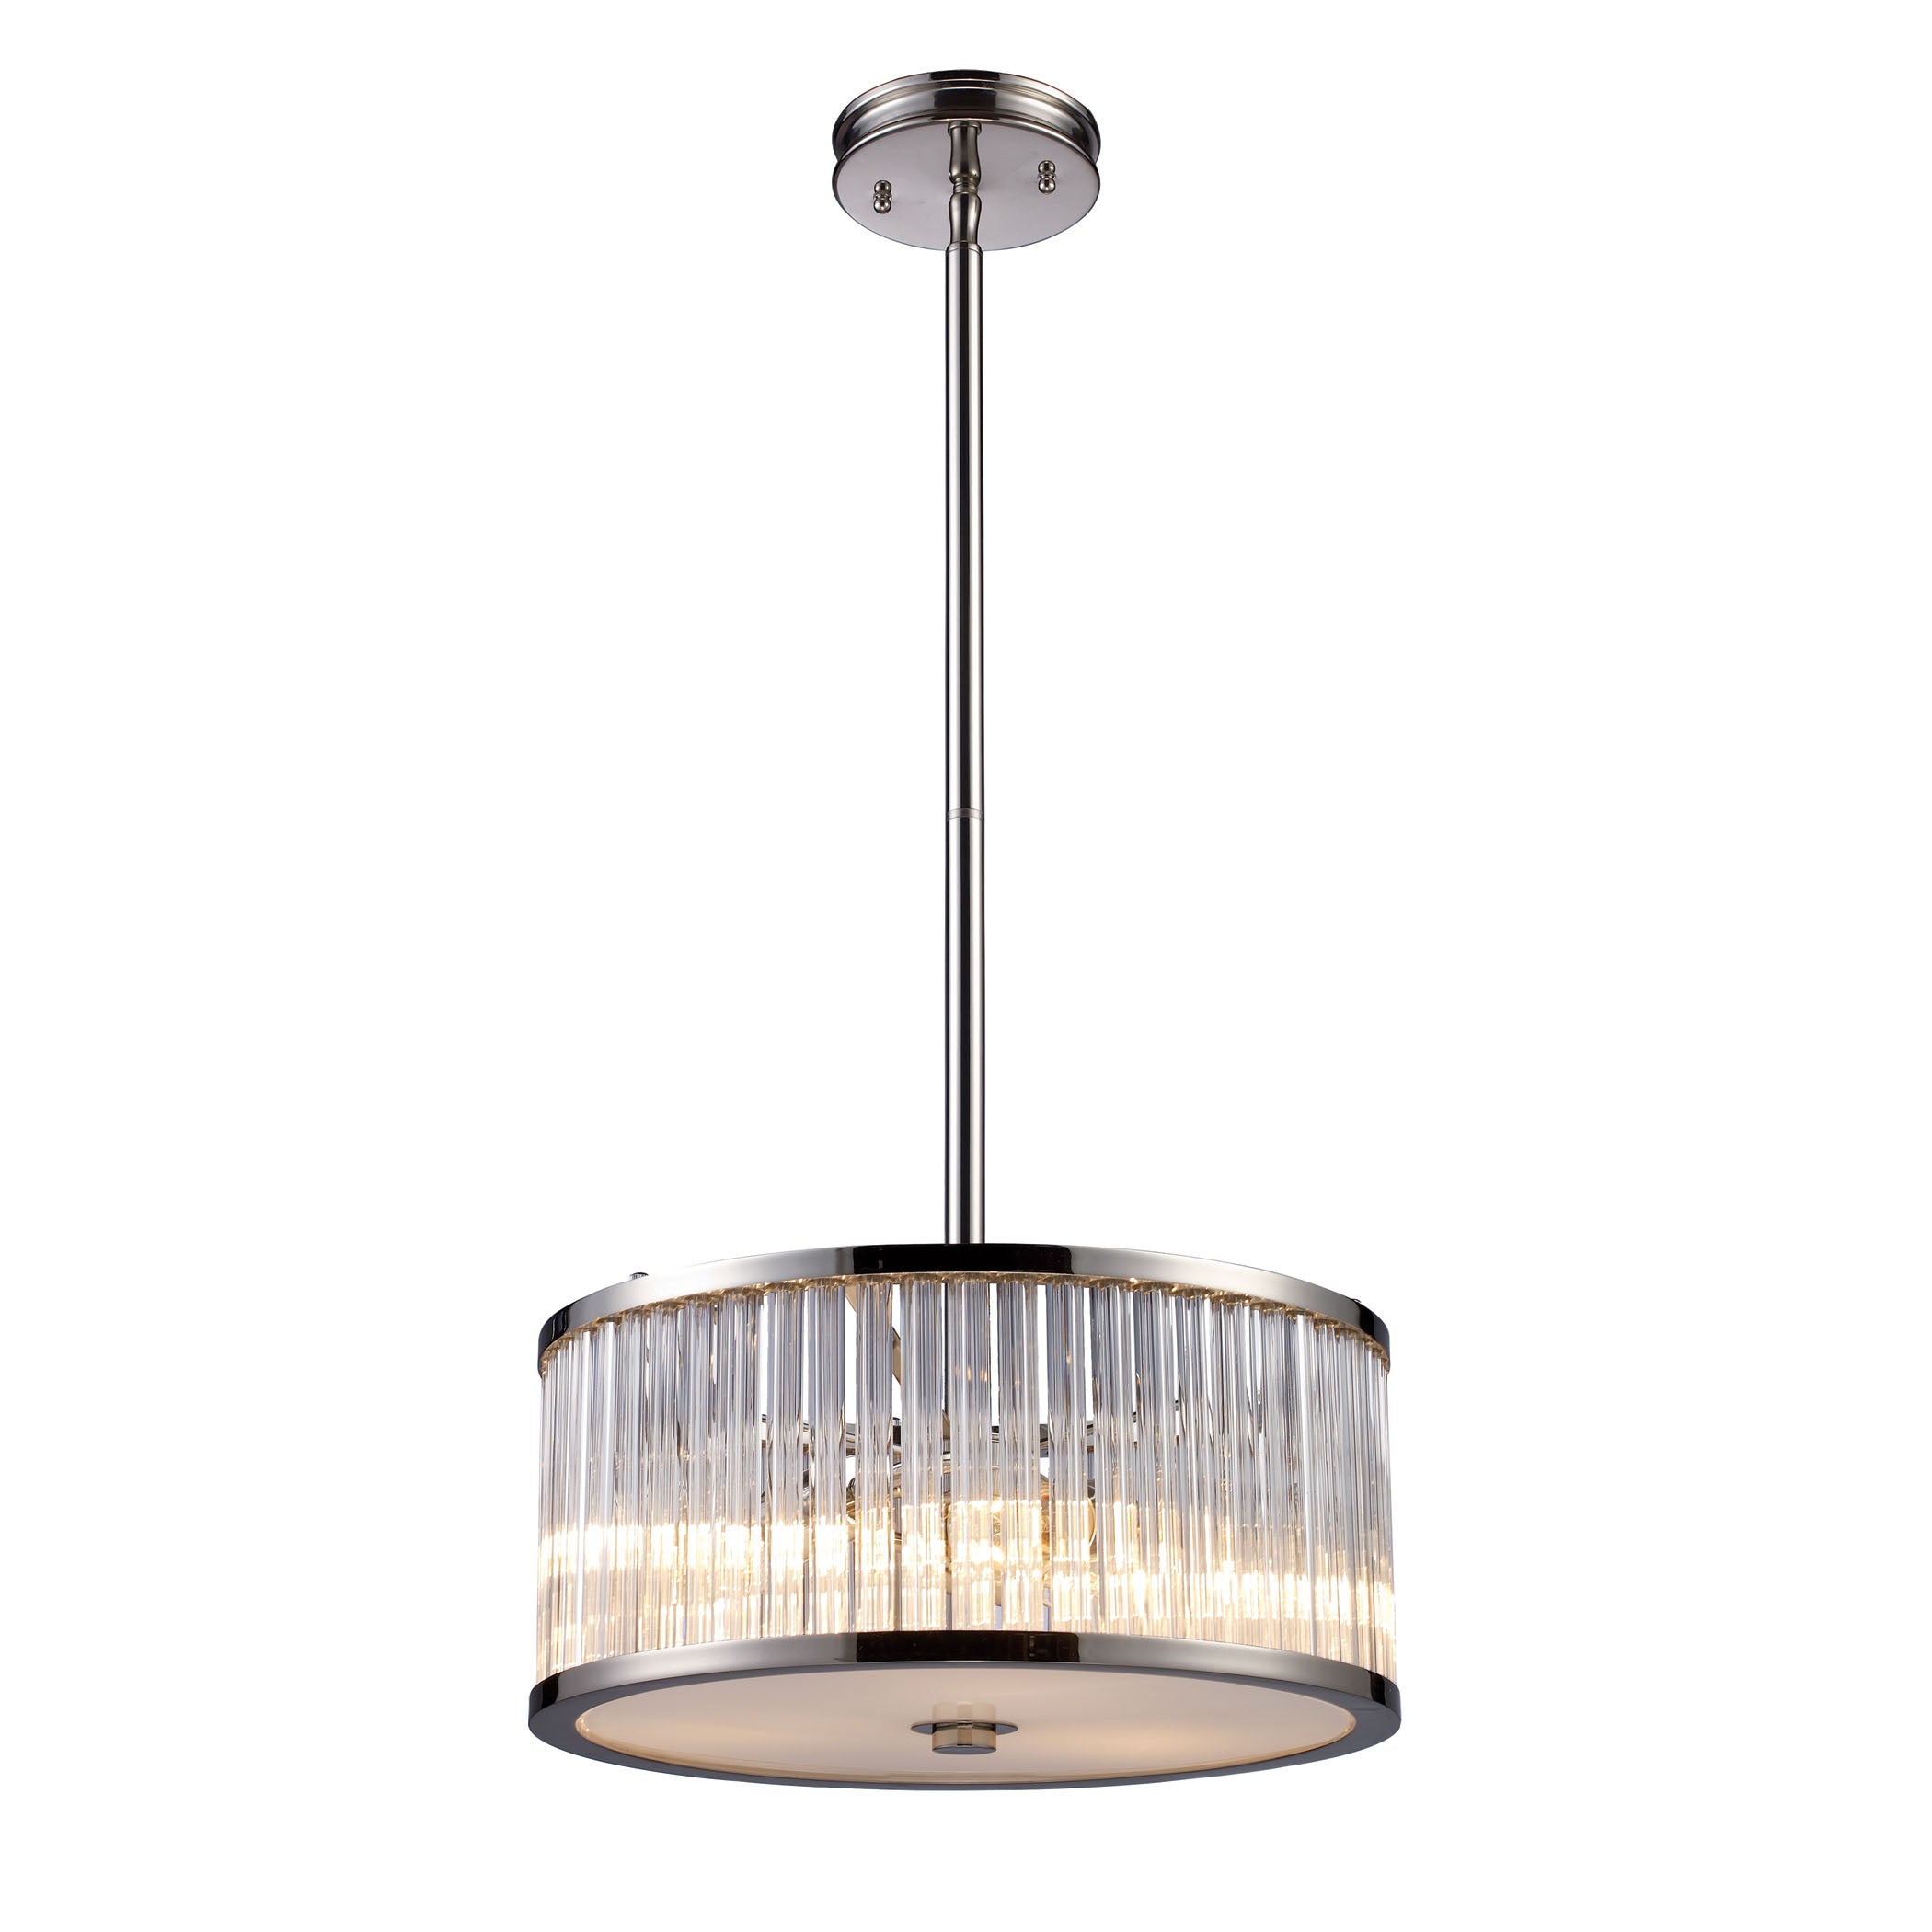 ELK Lighting 10128/3 Braxton 3-Light Chandelier in Polished Nickel with Ribbed Glass